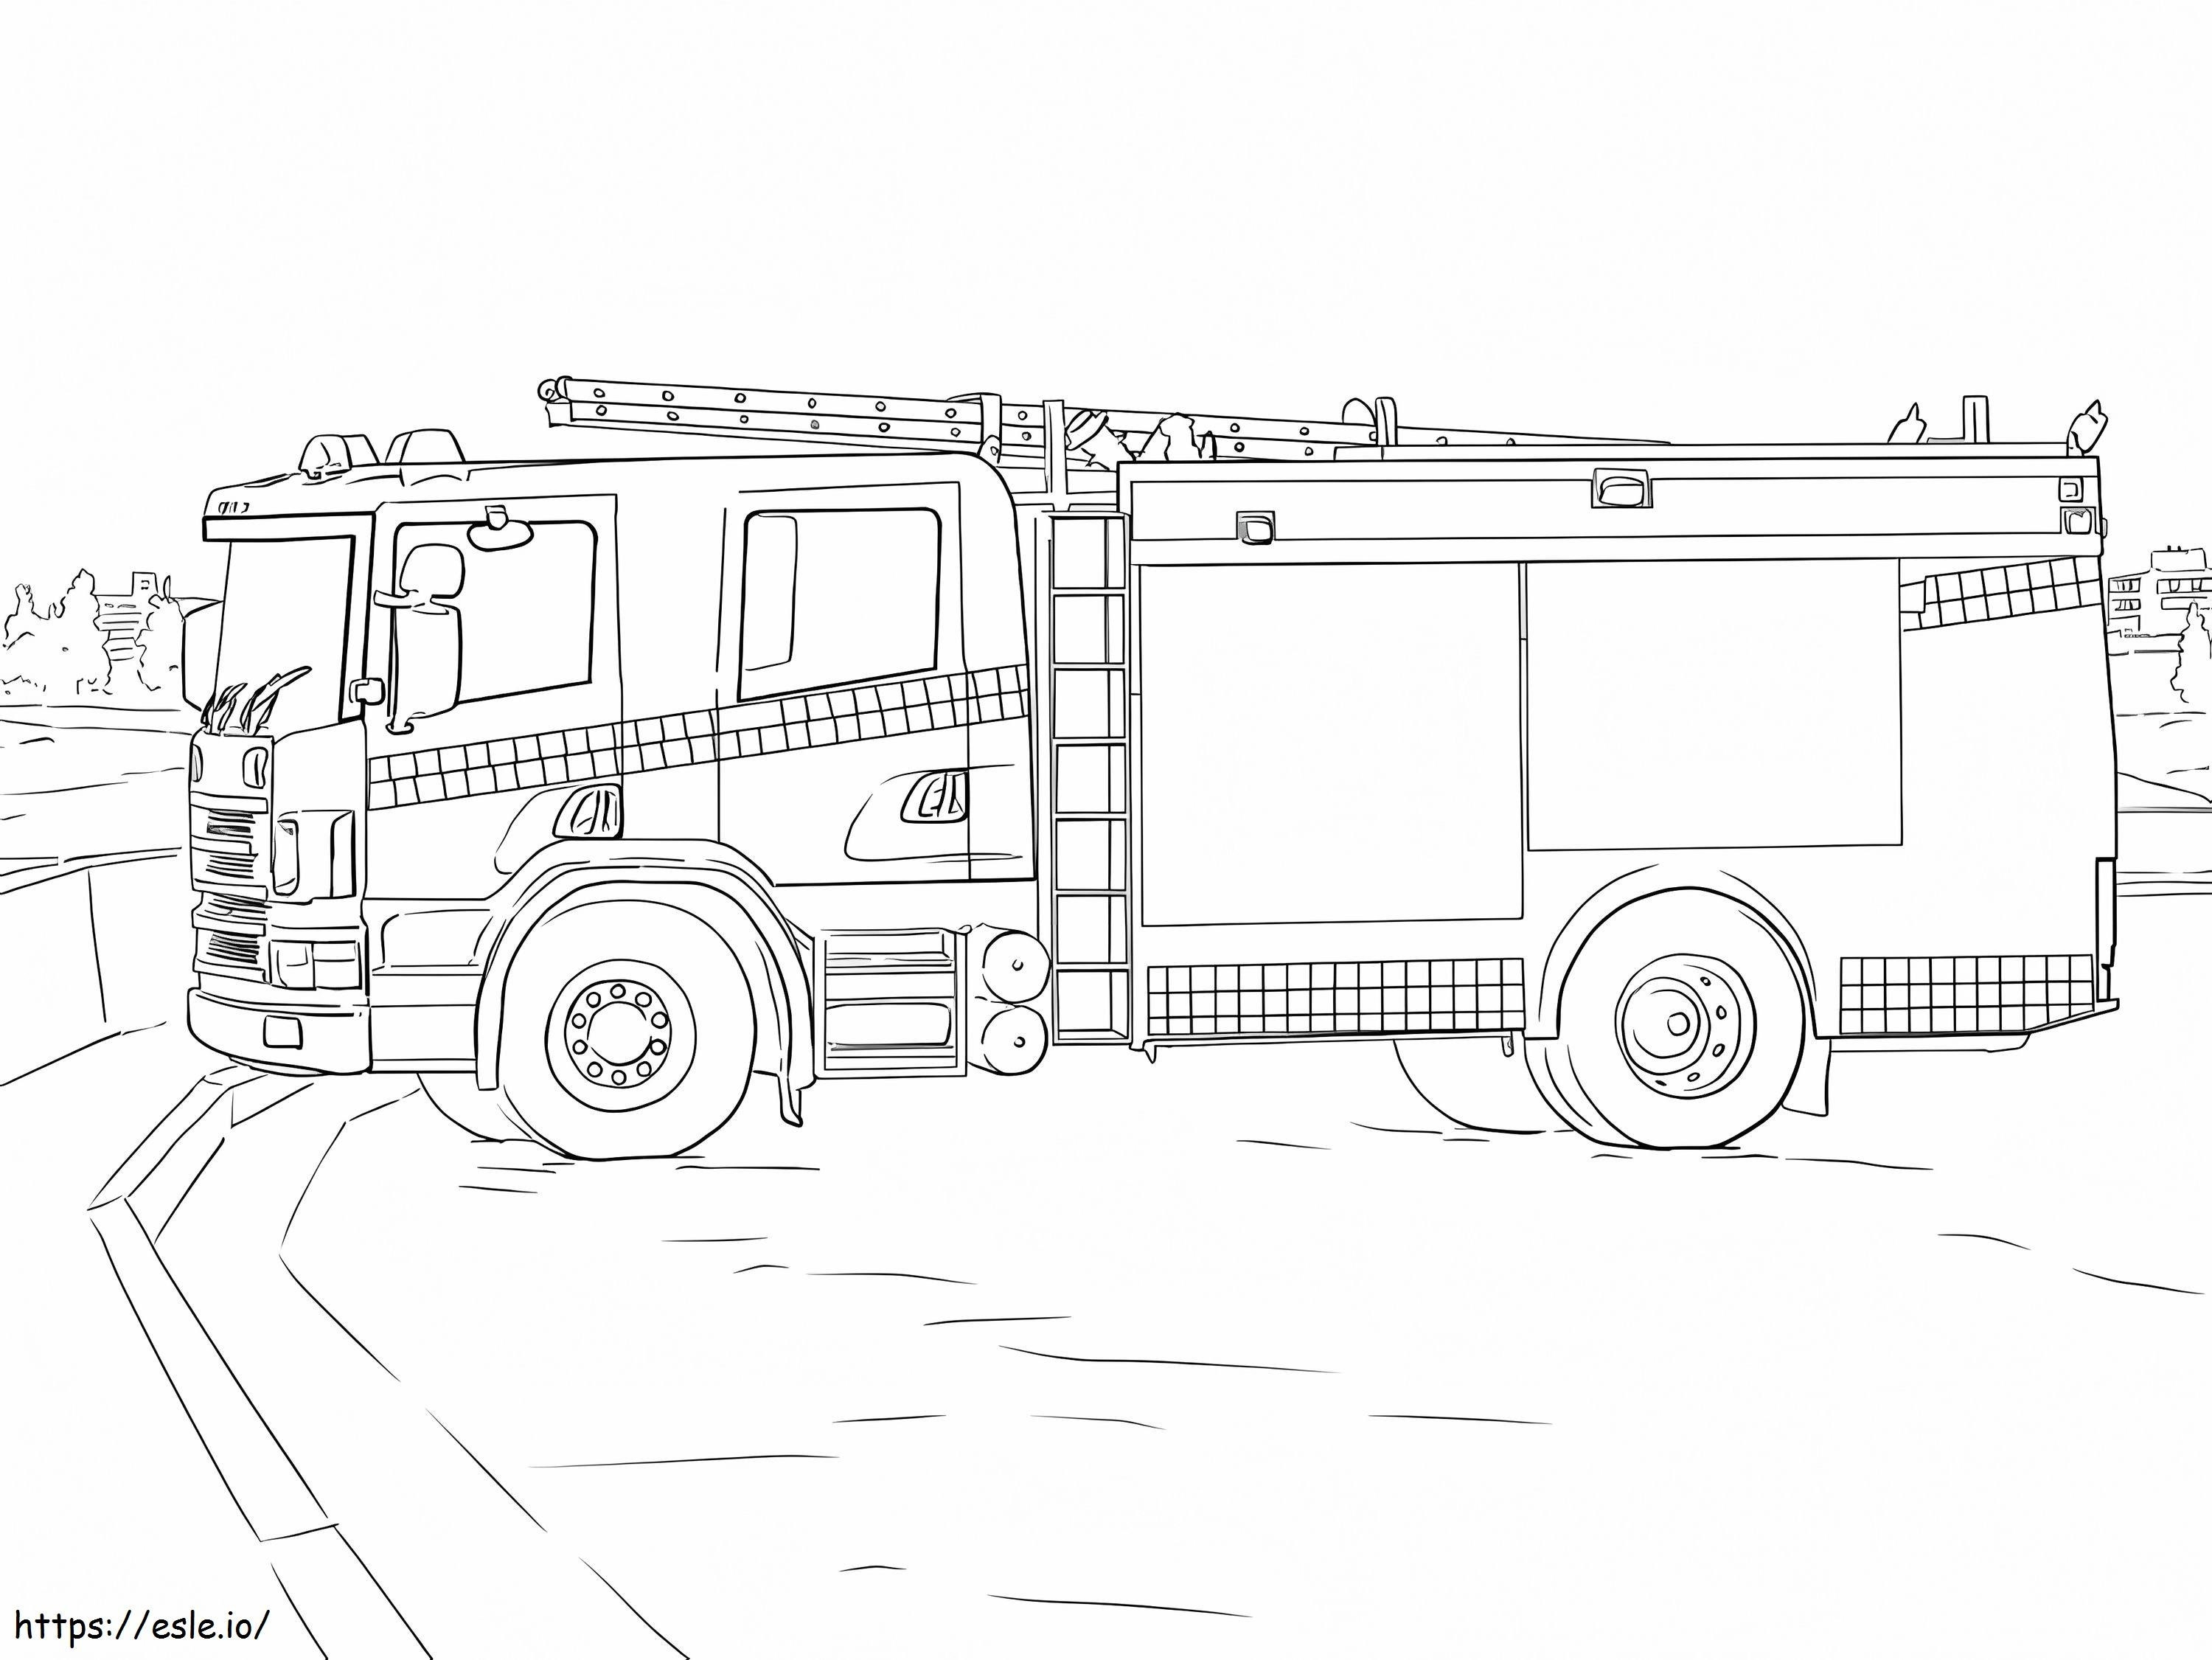 1584002045 Fire Truck Scania coloring page